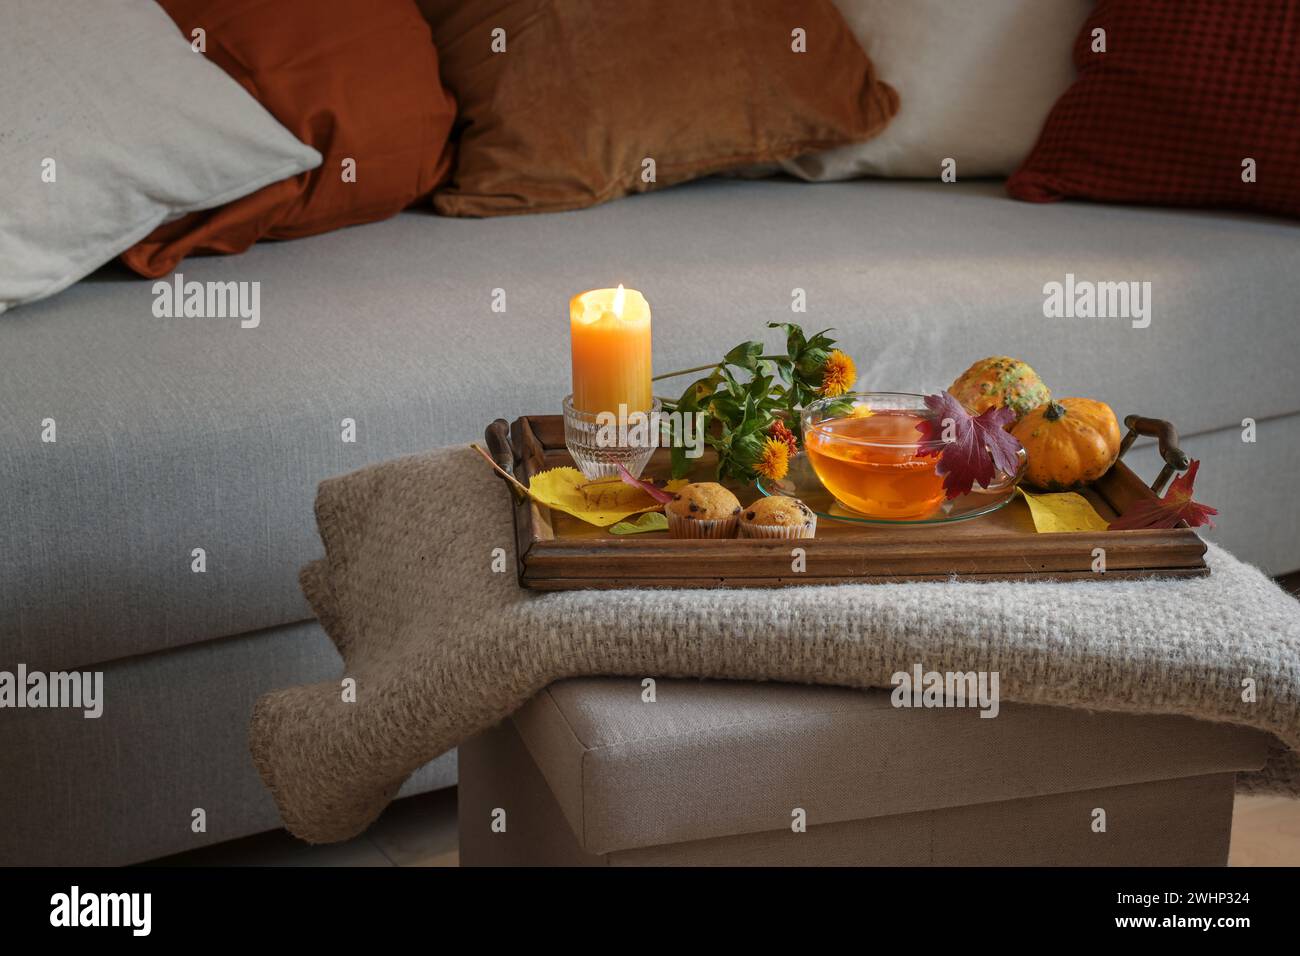 Cup of hot tea served on a wooden tray with candle, flowers, pumpkins and biscuits on a woolen blanket at the couch, cozy autumn Stock Photo